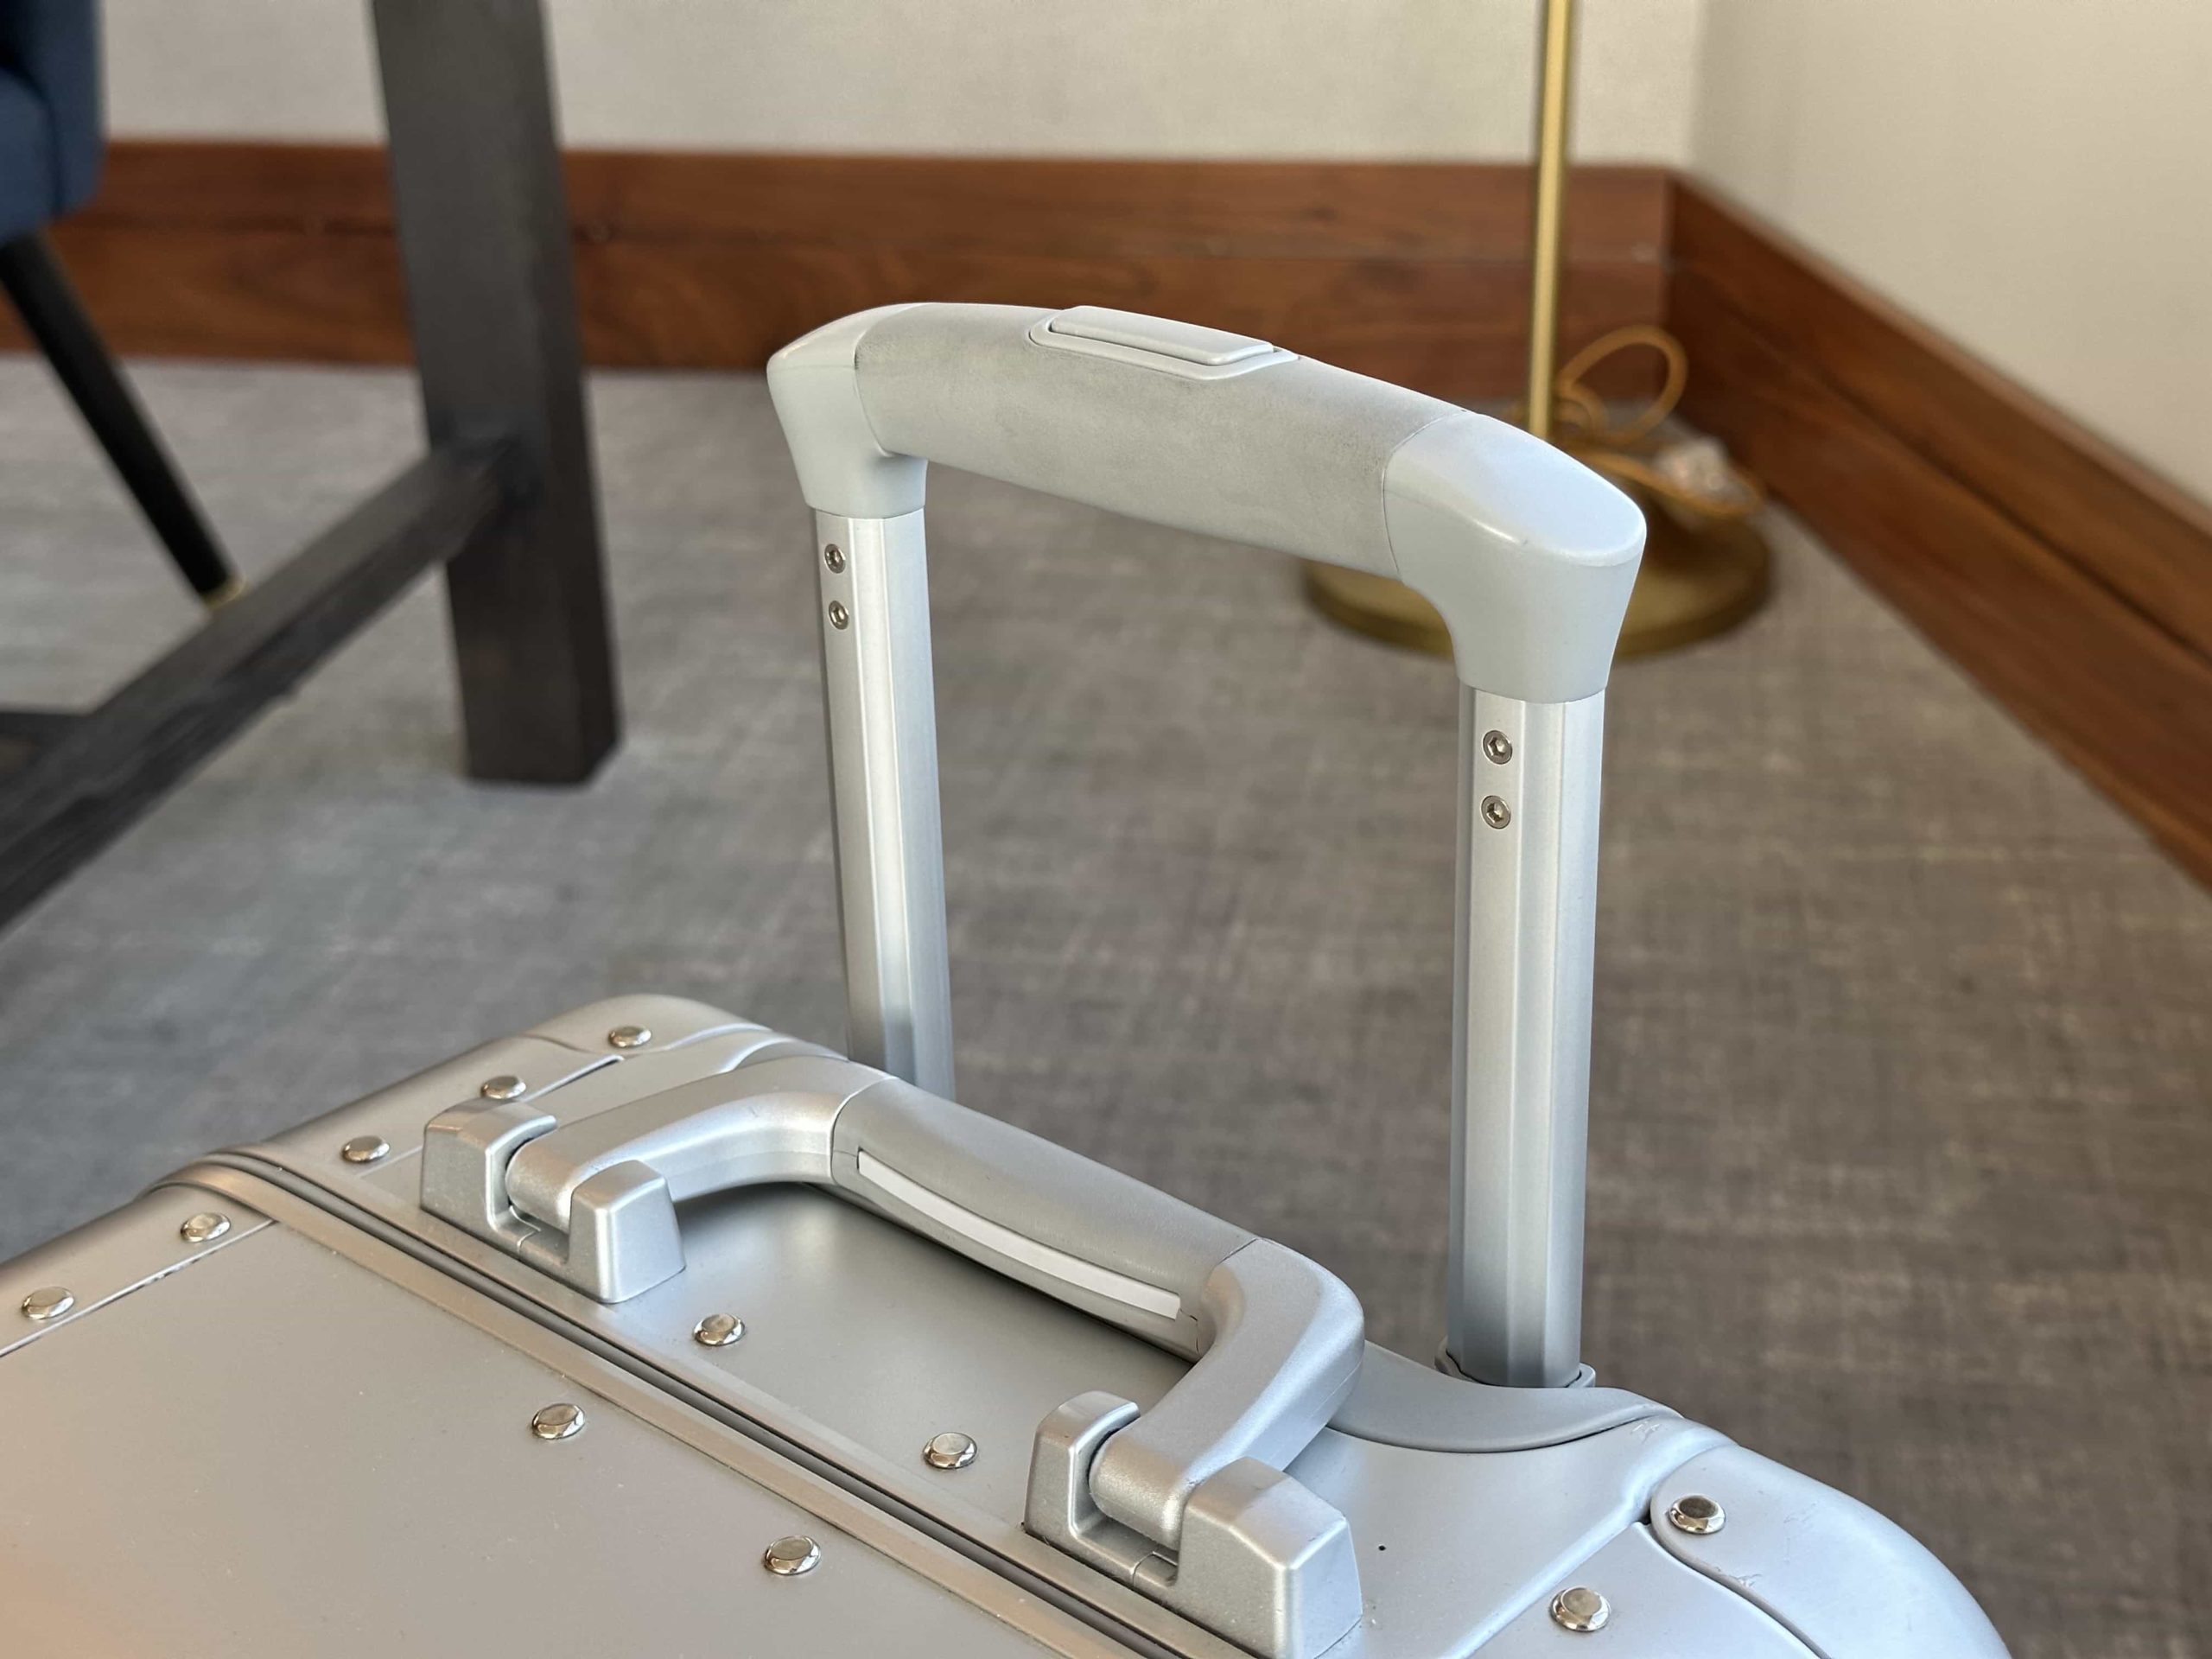 A telescoping handle on a suitcase slightly extended